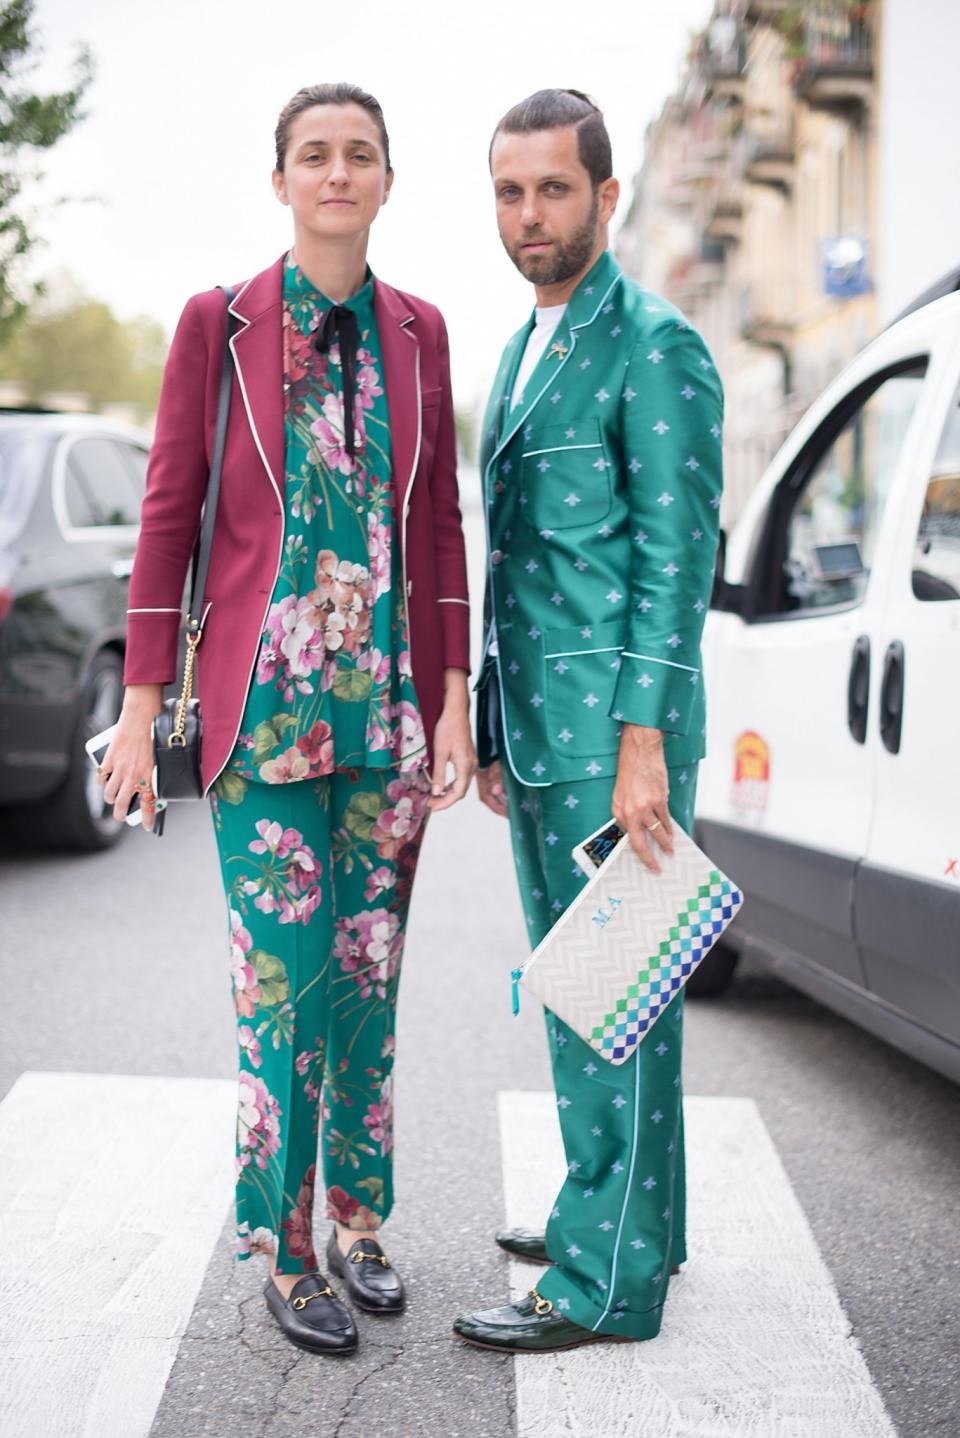 Twinning: a street style duo wear his and hers green pajamas.